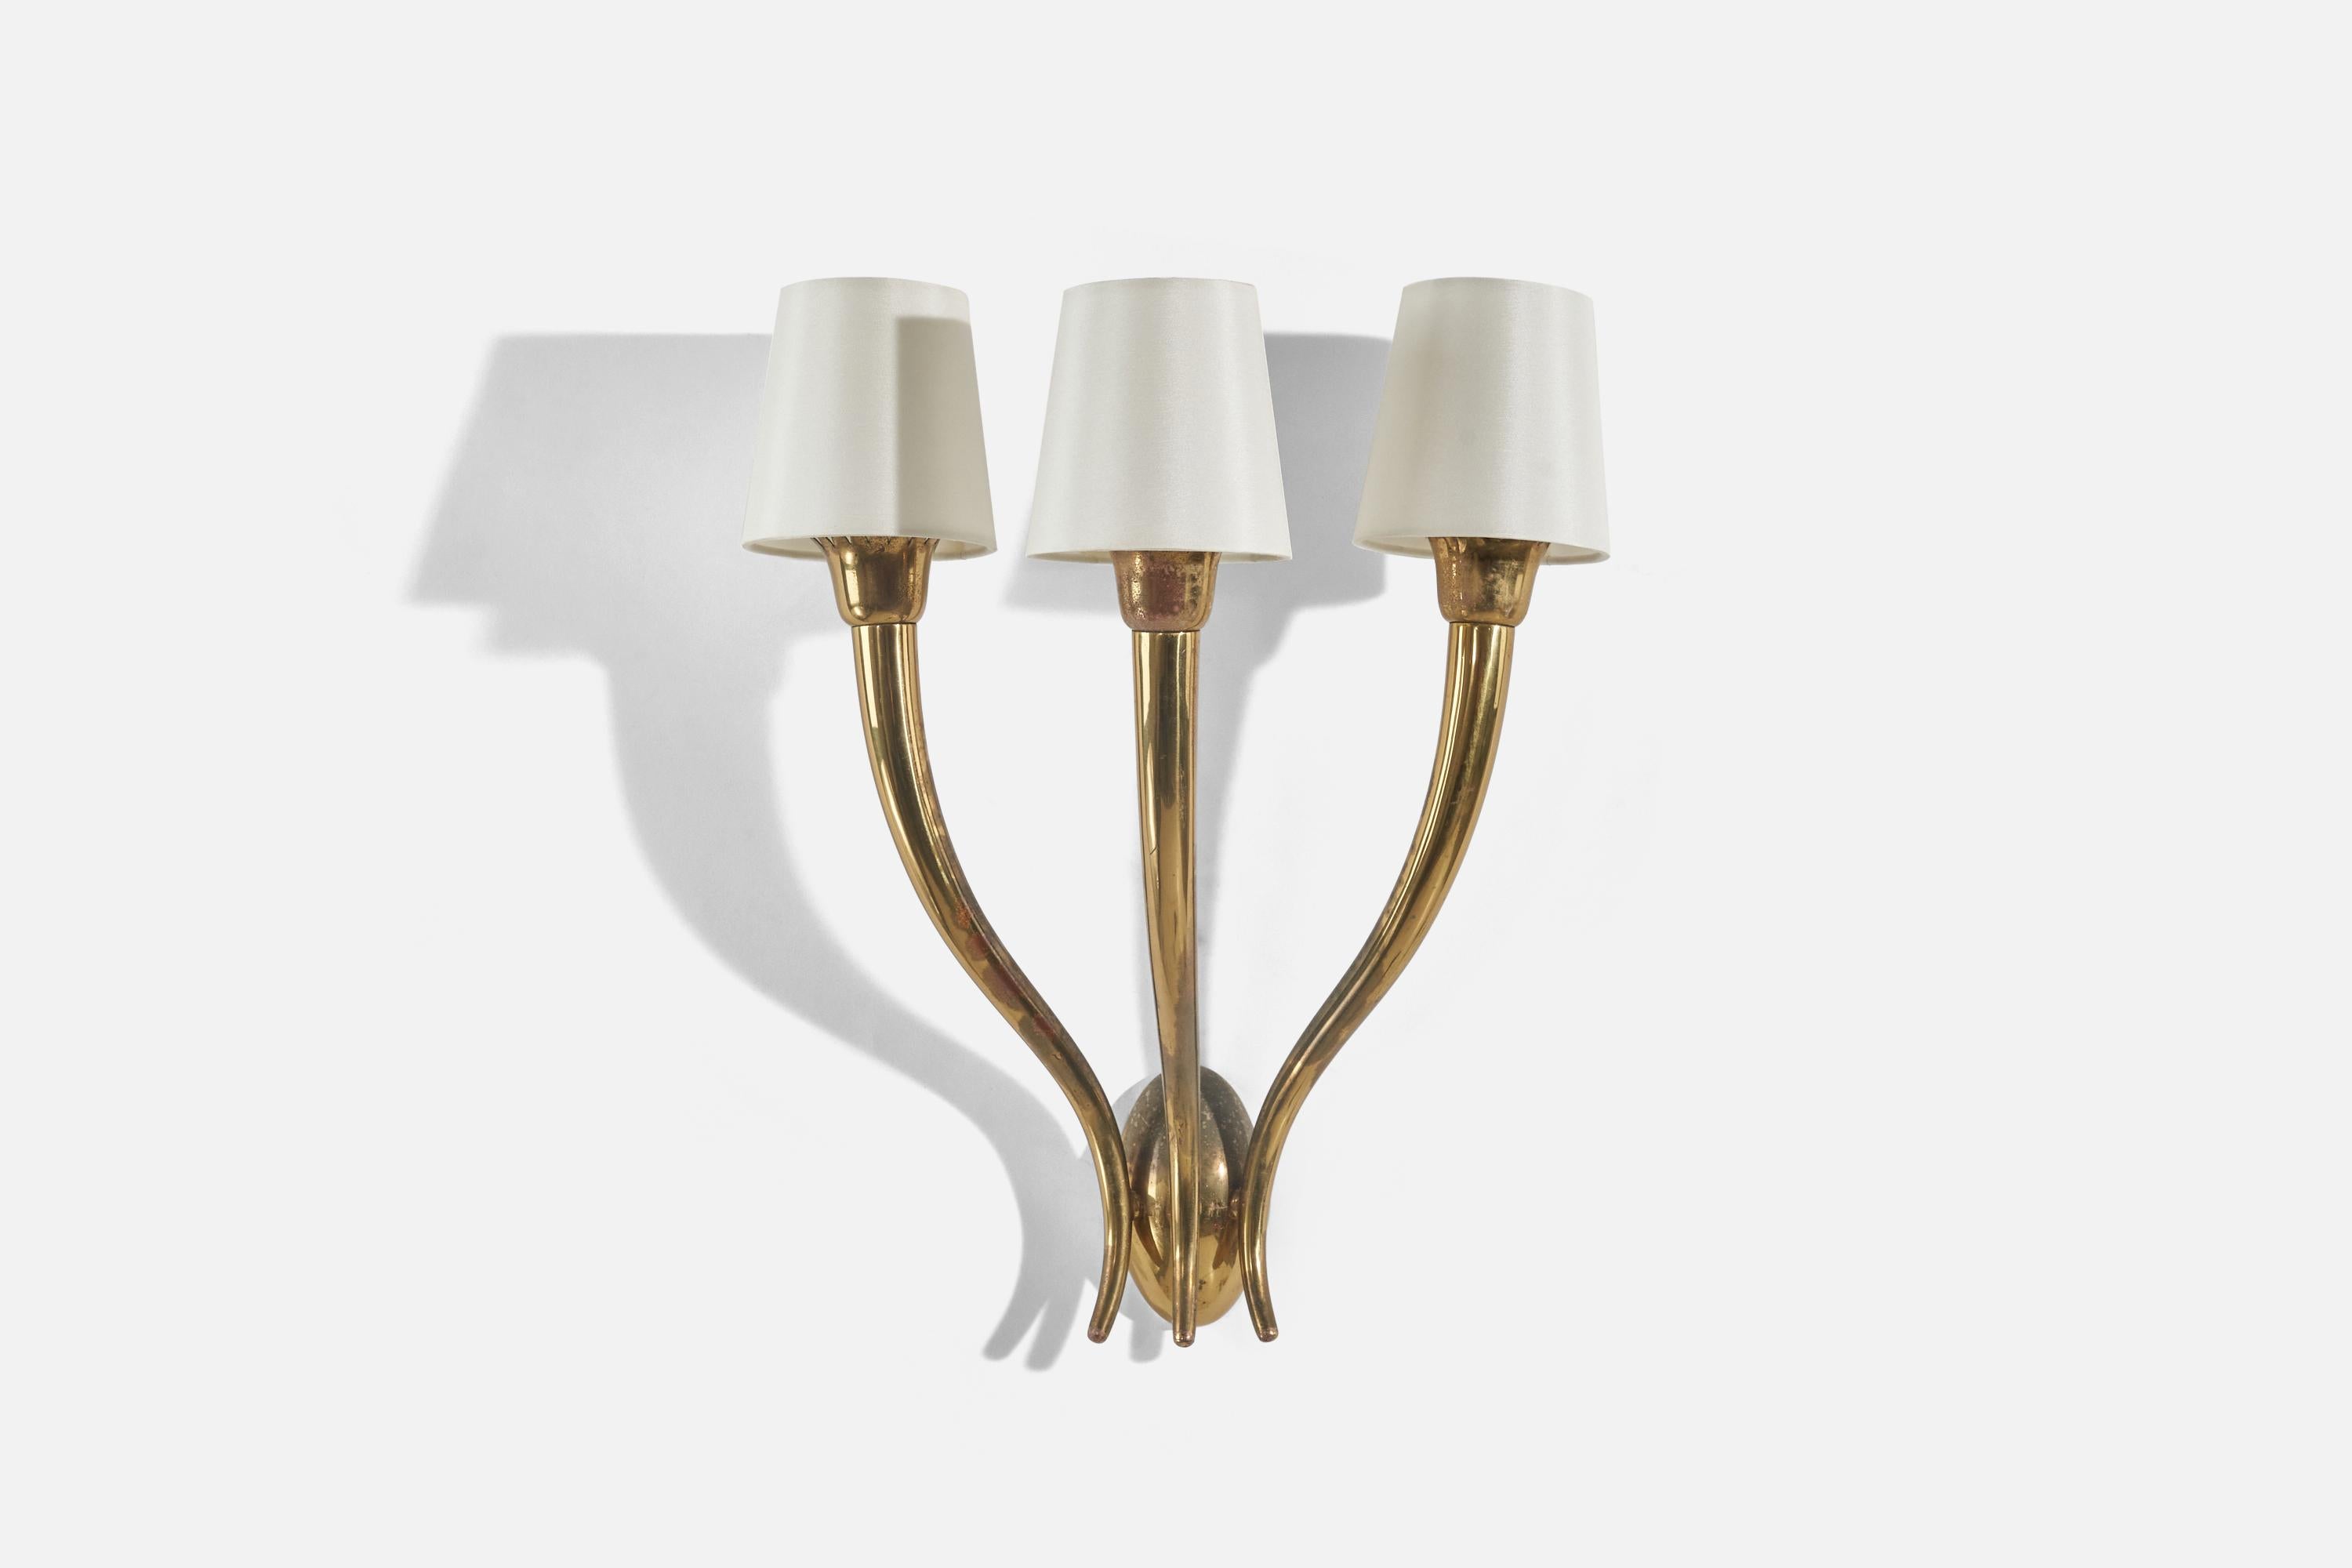 A pair of brass and silk sconces; design and production attributed to Guglielmo Ulrich, Italy, 1940s. 

Sold with Lampshades. Dimensions stated are of Sconce with lampshades.

Dimensions of Back Plate (inches) : 4.47 x 2.65 x 1.27 (Height x